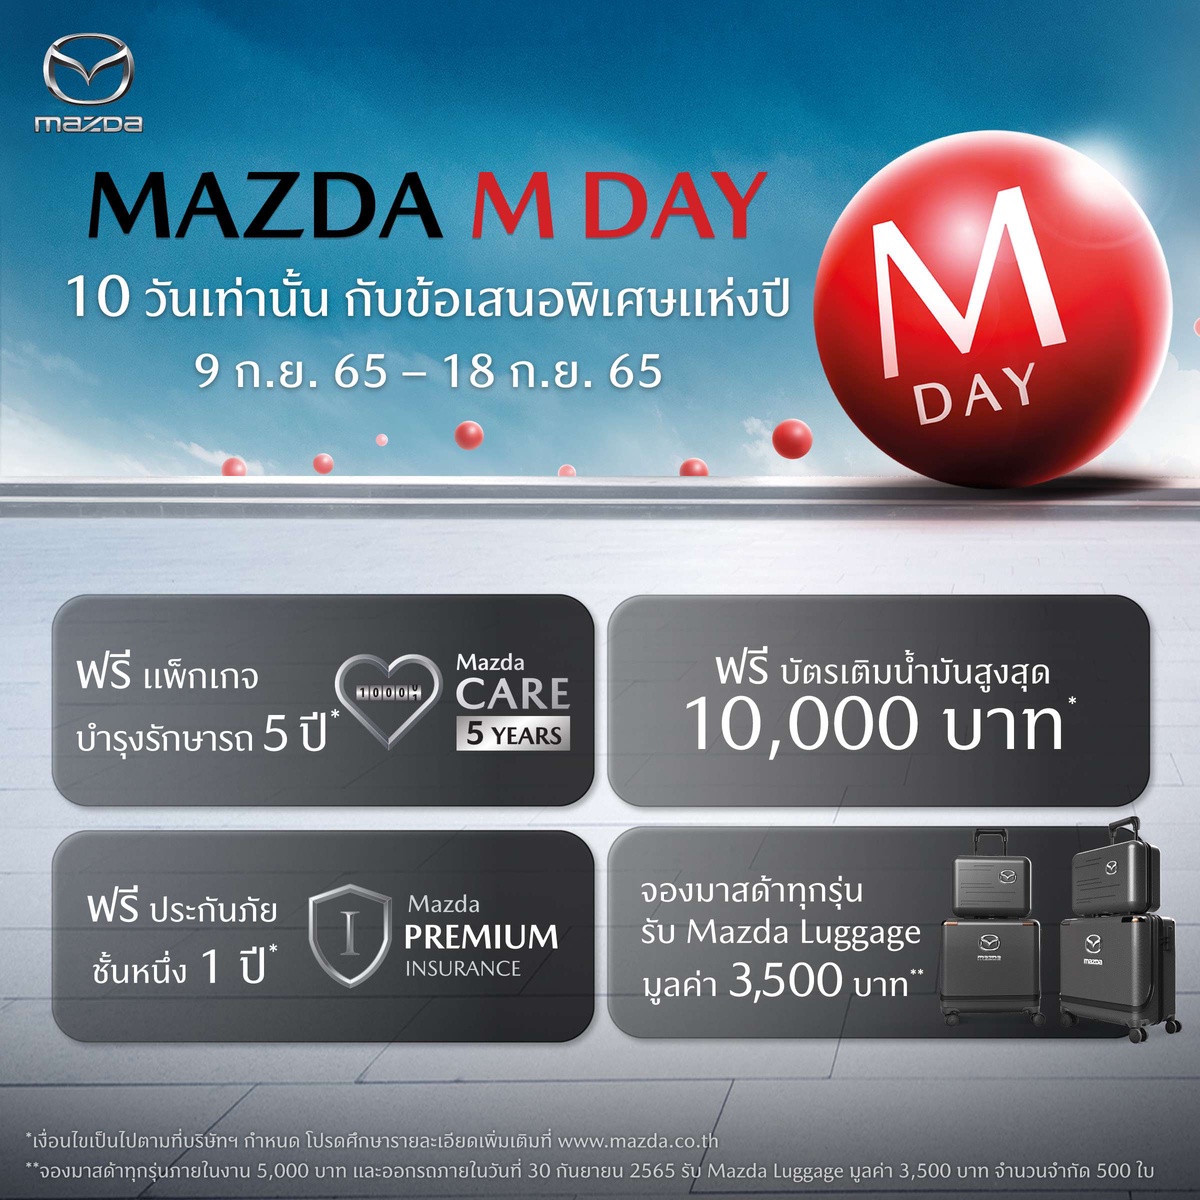 Mazda overcome the situation, its sales in August grew 50% and grew all model, prepare to offer special deals of the year with MAZDA M DAY for 10 days only